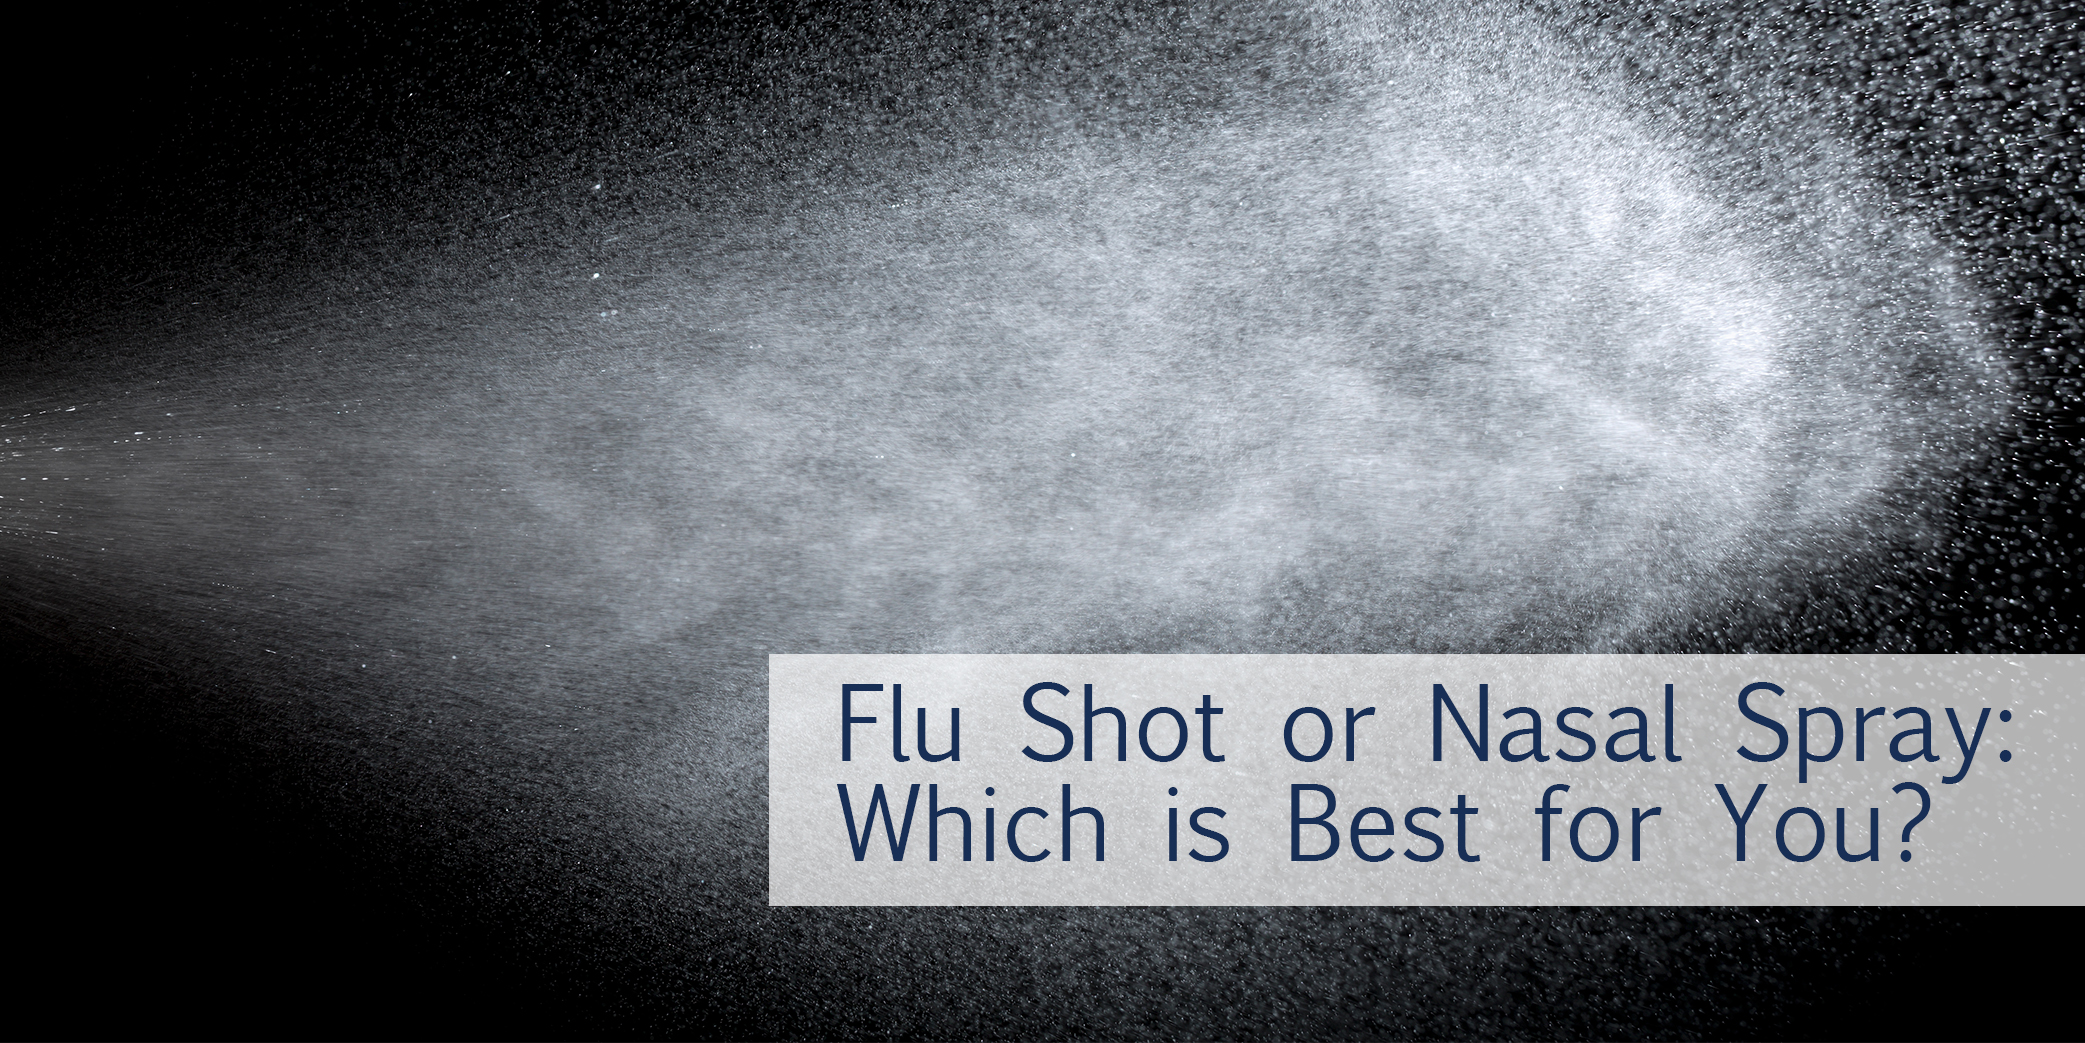 Flu Shot or Nasal Spray: Which is Best for You?